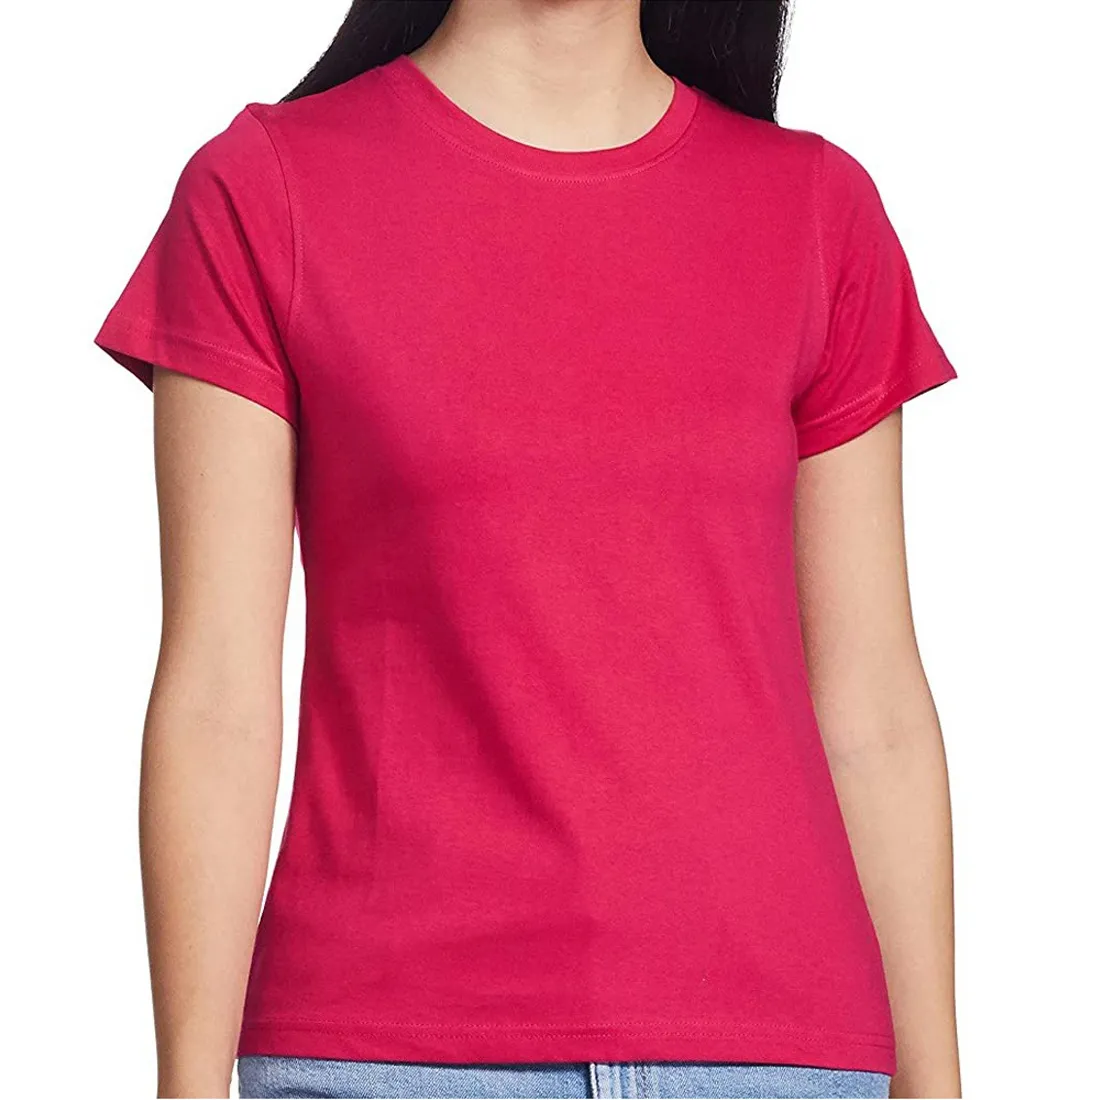 New Breatahable Women Casual Short-Sleeve Tops Custom T Shirts Wholesale Low Price Best Material